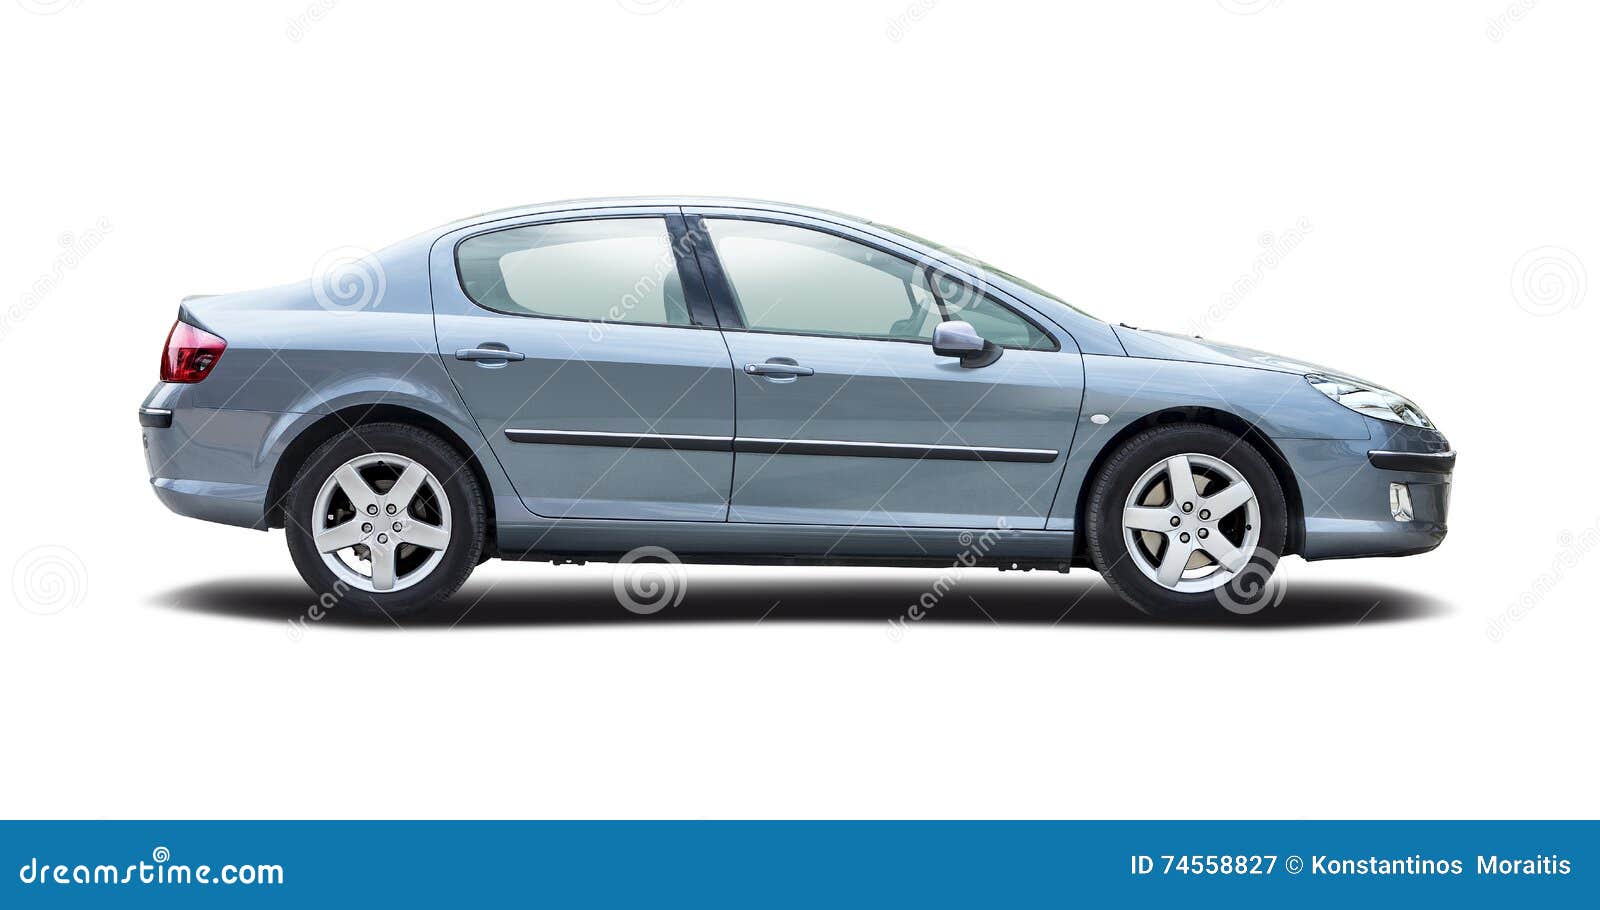 Peugeot 407 Isolated on White Stock Image - Image of side, view: 74558827